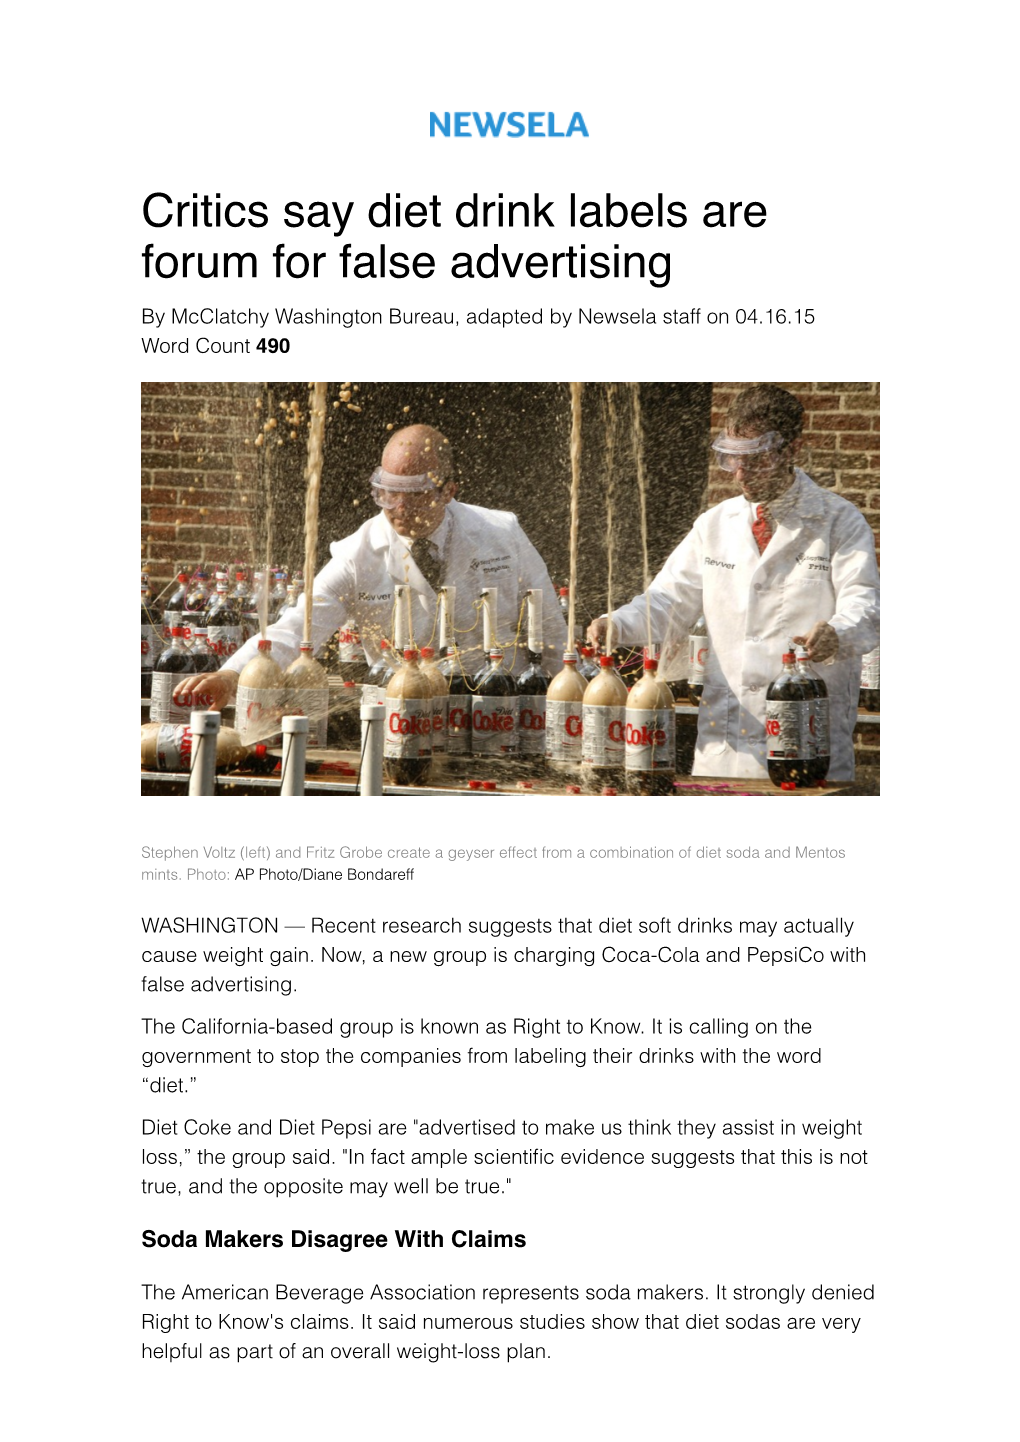 Critics Say Diet Drink Labels Are Forum for False Advertising by Mcclatchy Washington Bureau, Adapted by Newsela Staff on 04.16.15 Word Count 490